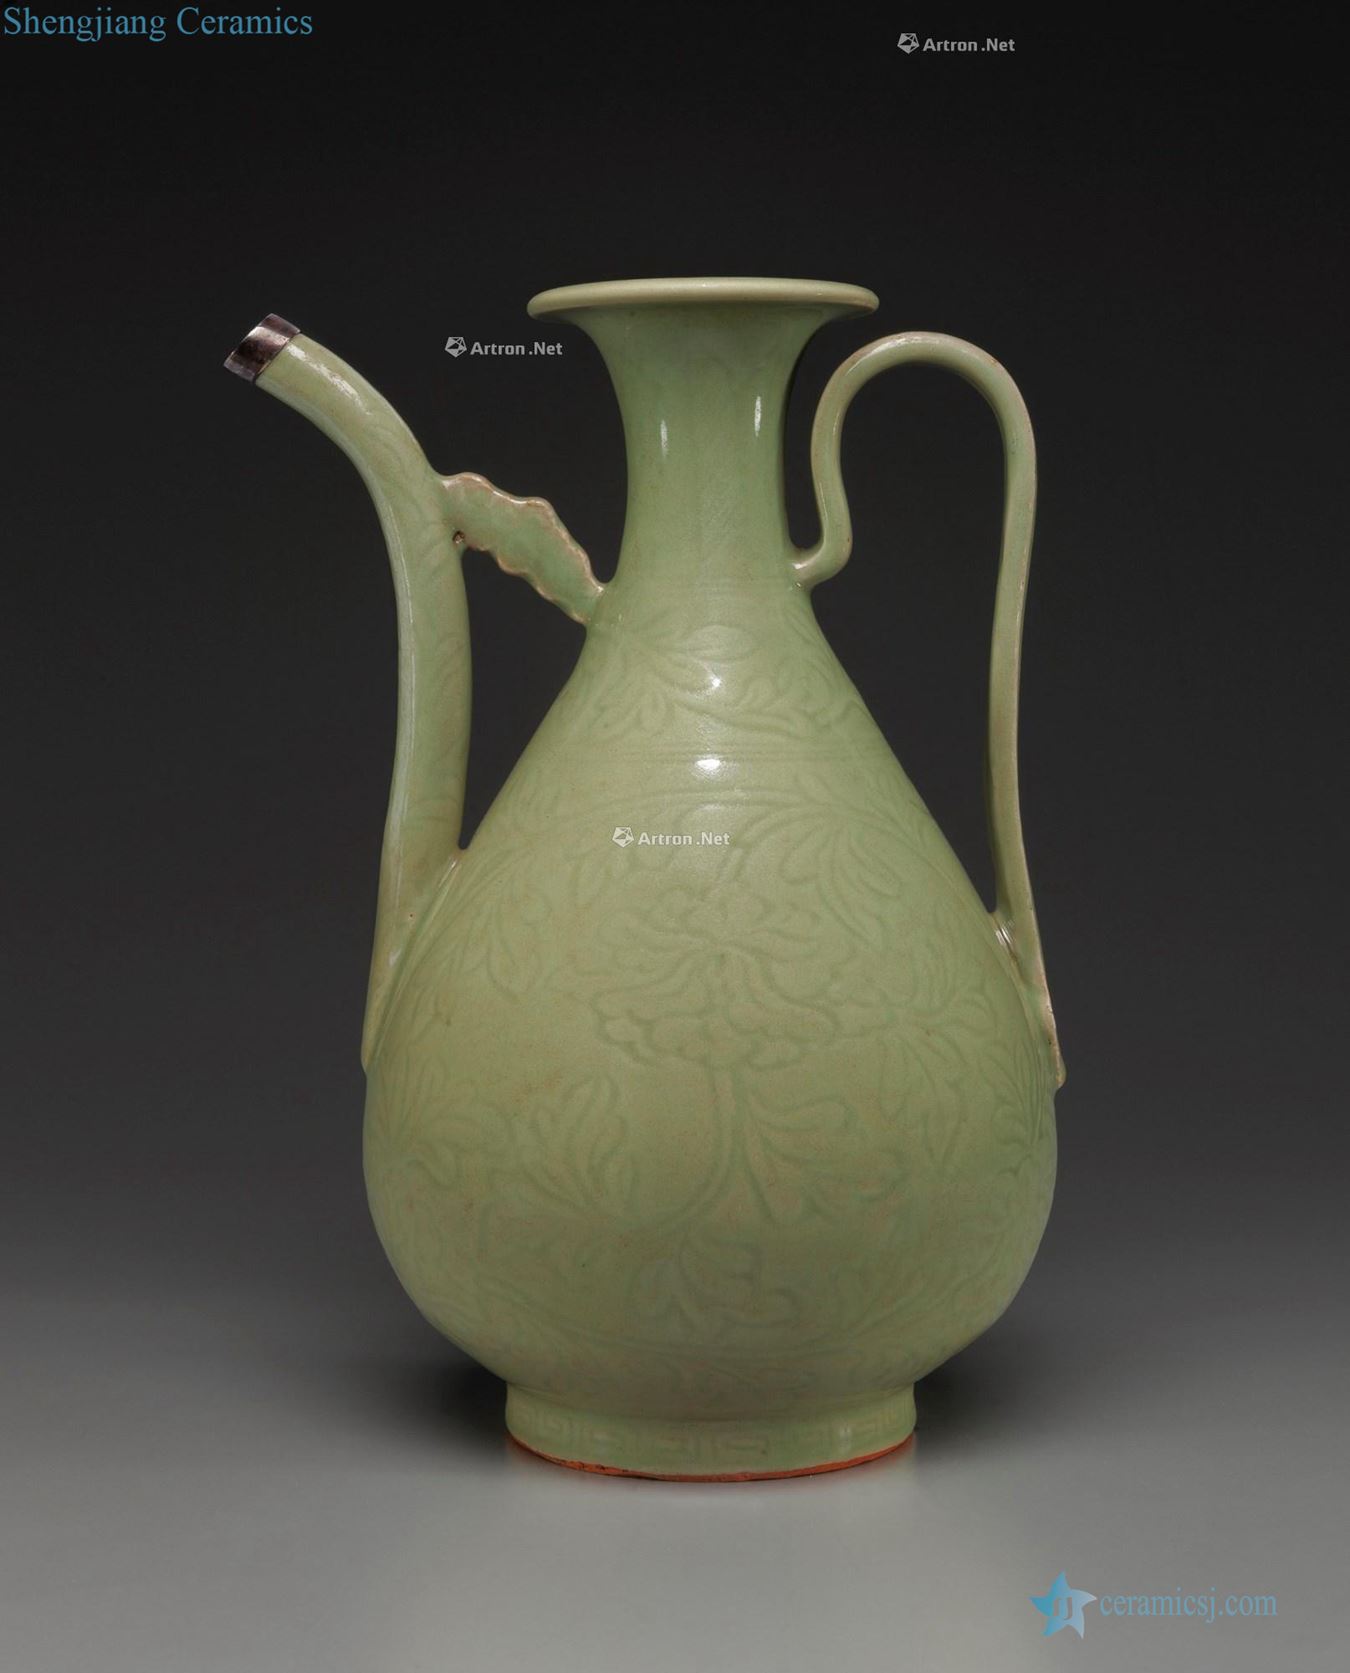 Ming, 14 to 15 centuries later A CARVED LONGQUAN CELADON EWER